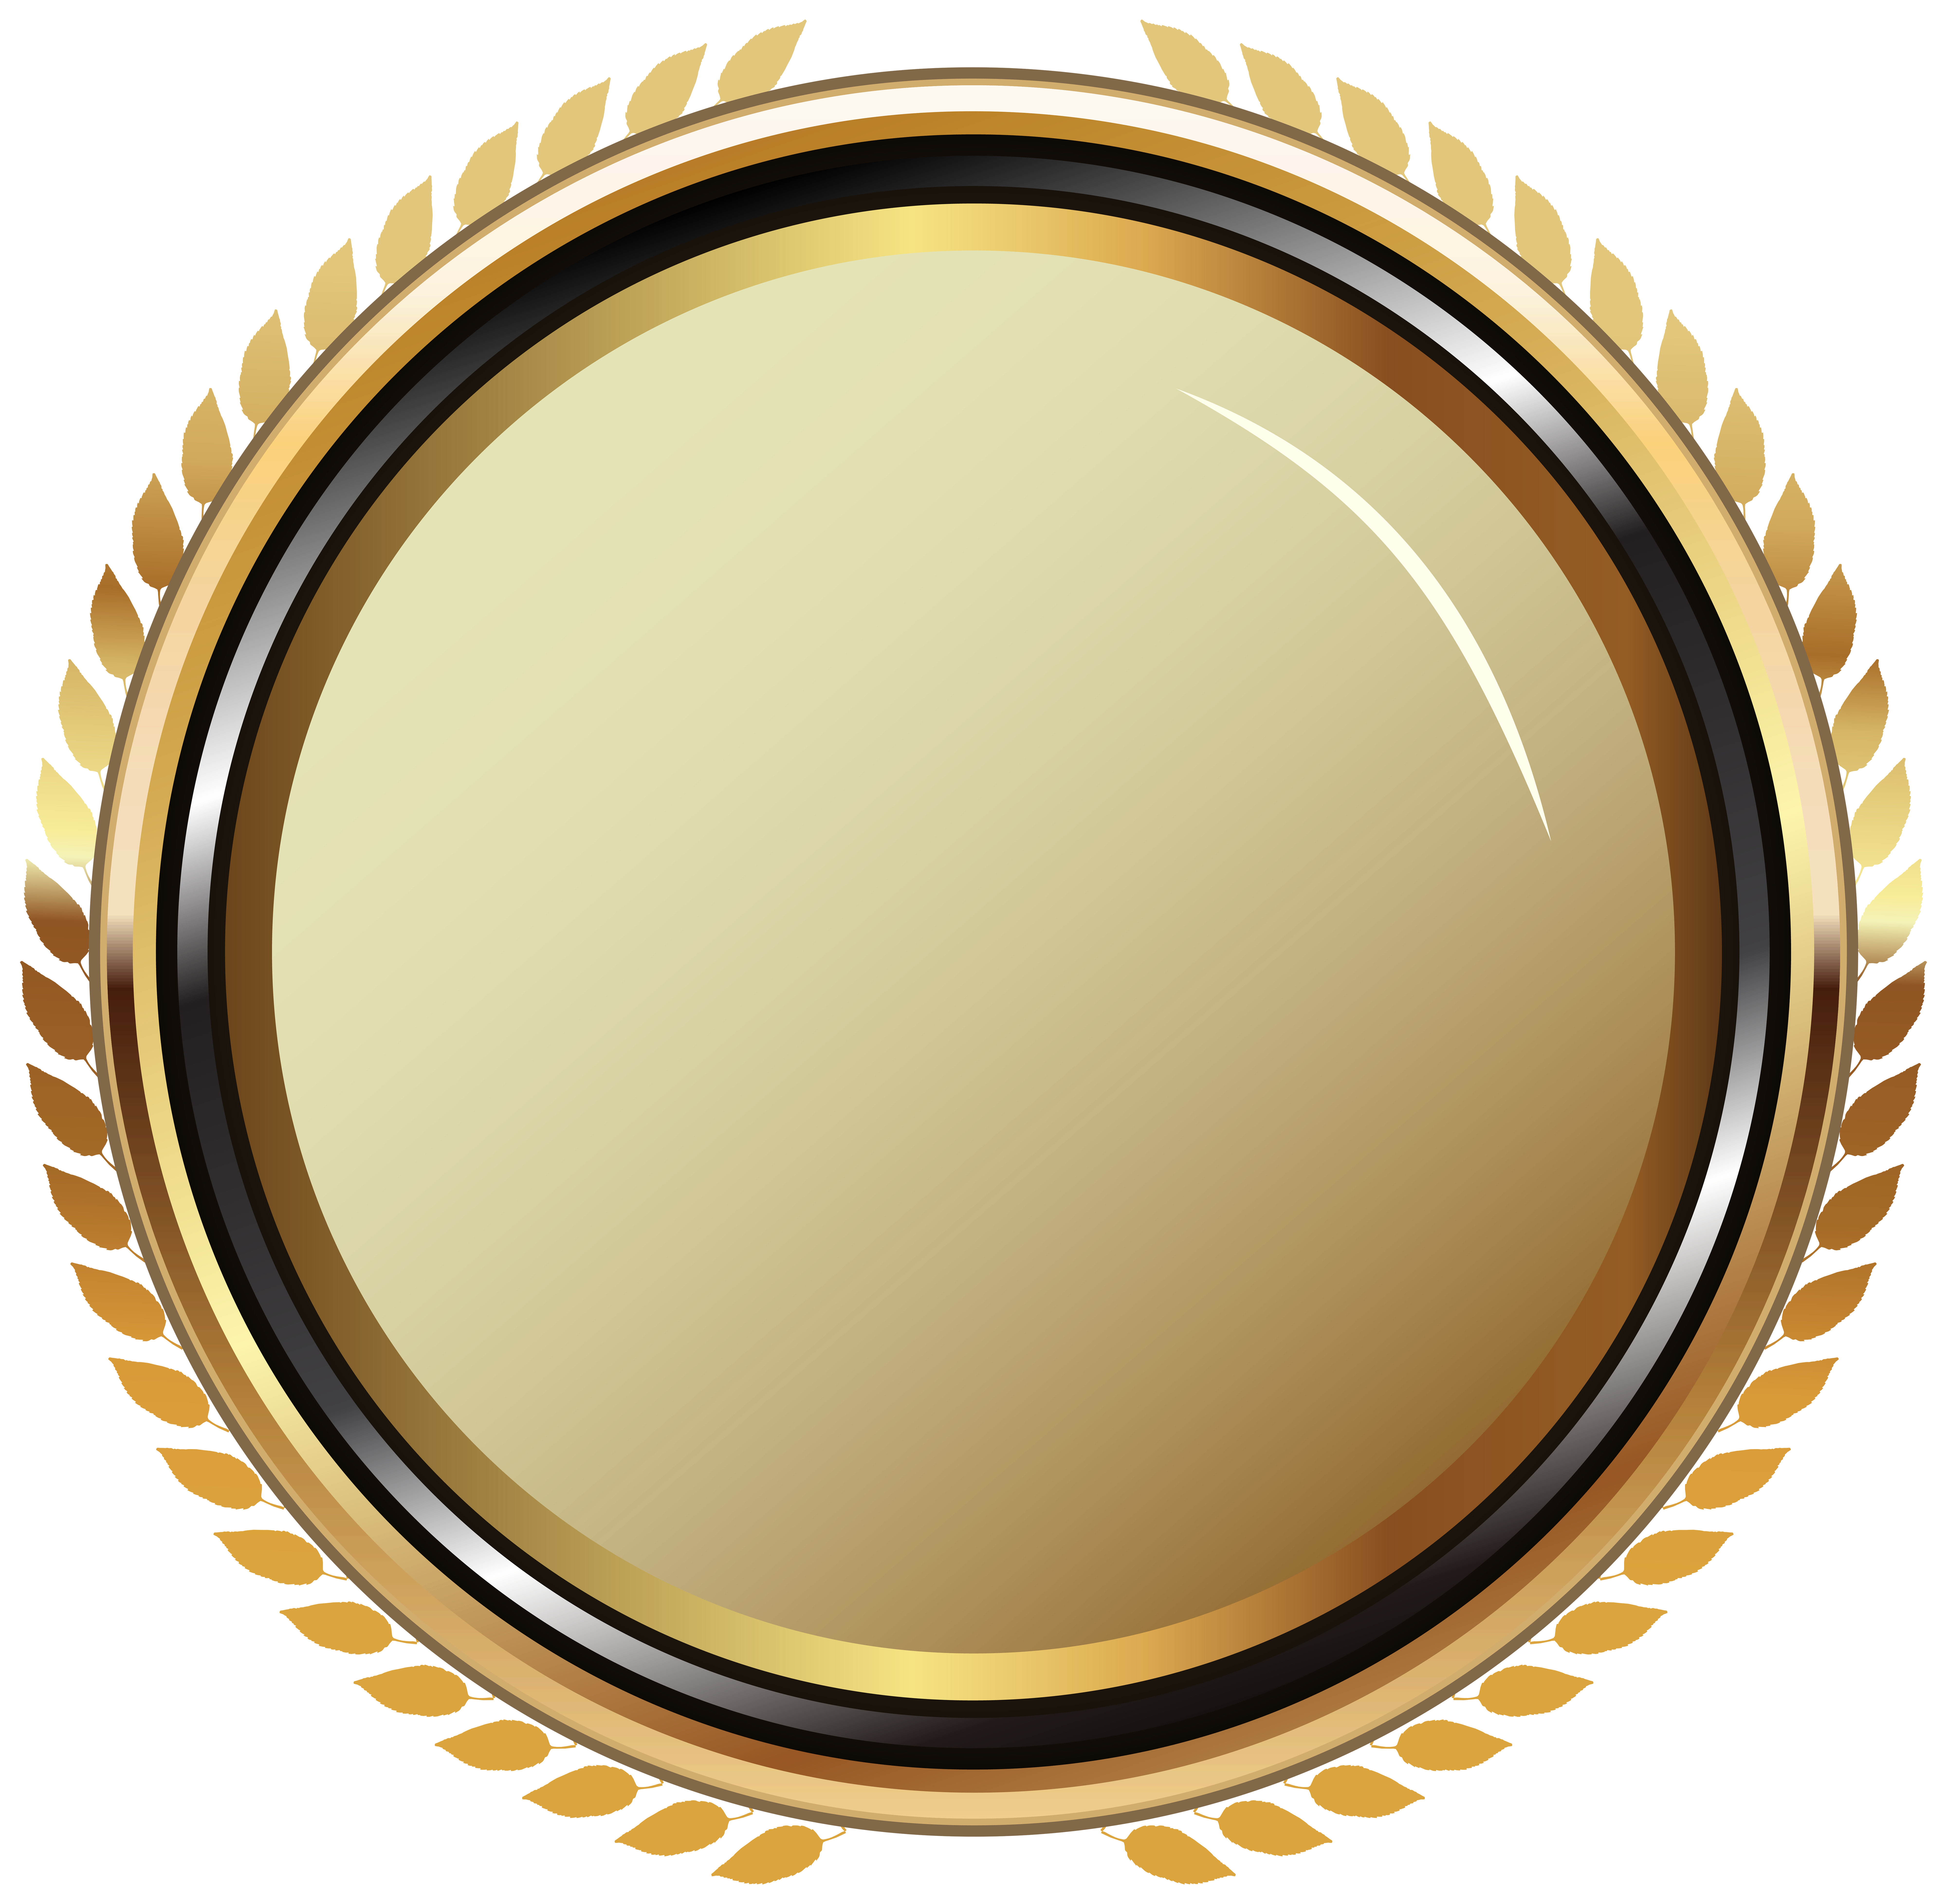 Oval Badge Transparent Gold PNG Free Photo Clipart